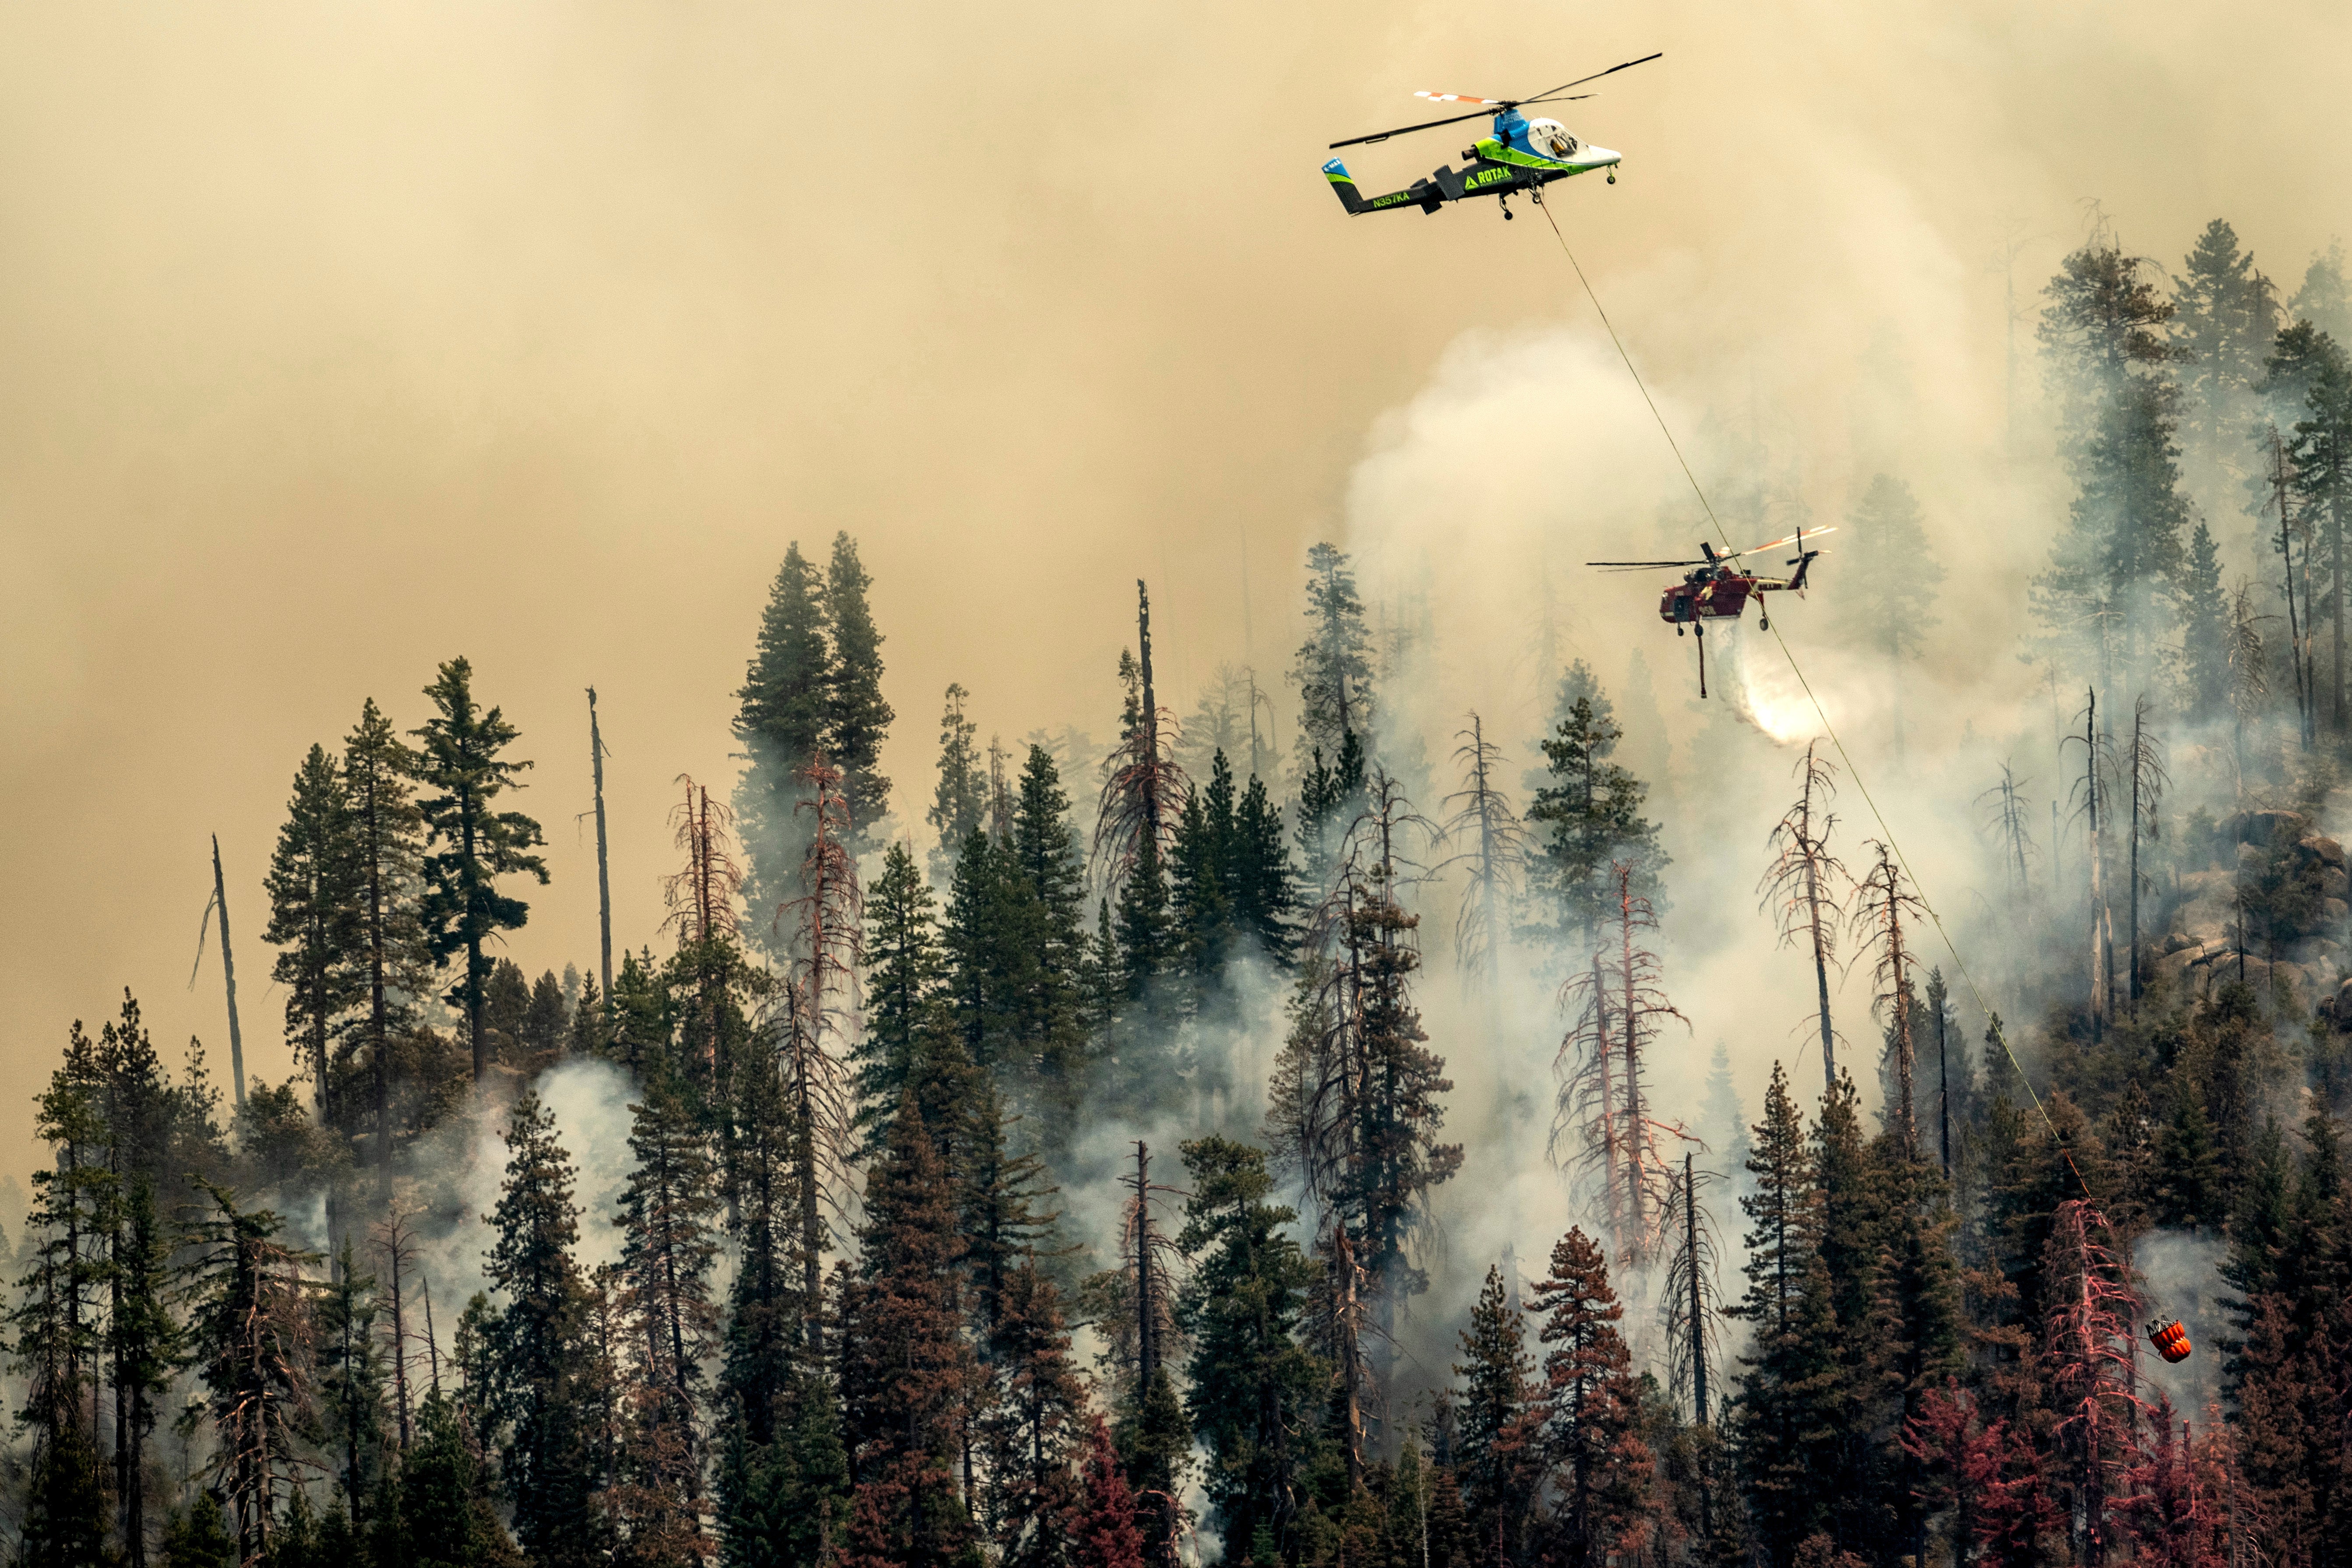 A helicopter drops water on the Washburn Fire burning through Yosemite National Park on Saturday, July 9. (Photo: Noah Berger, AP)